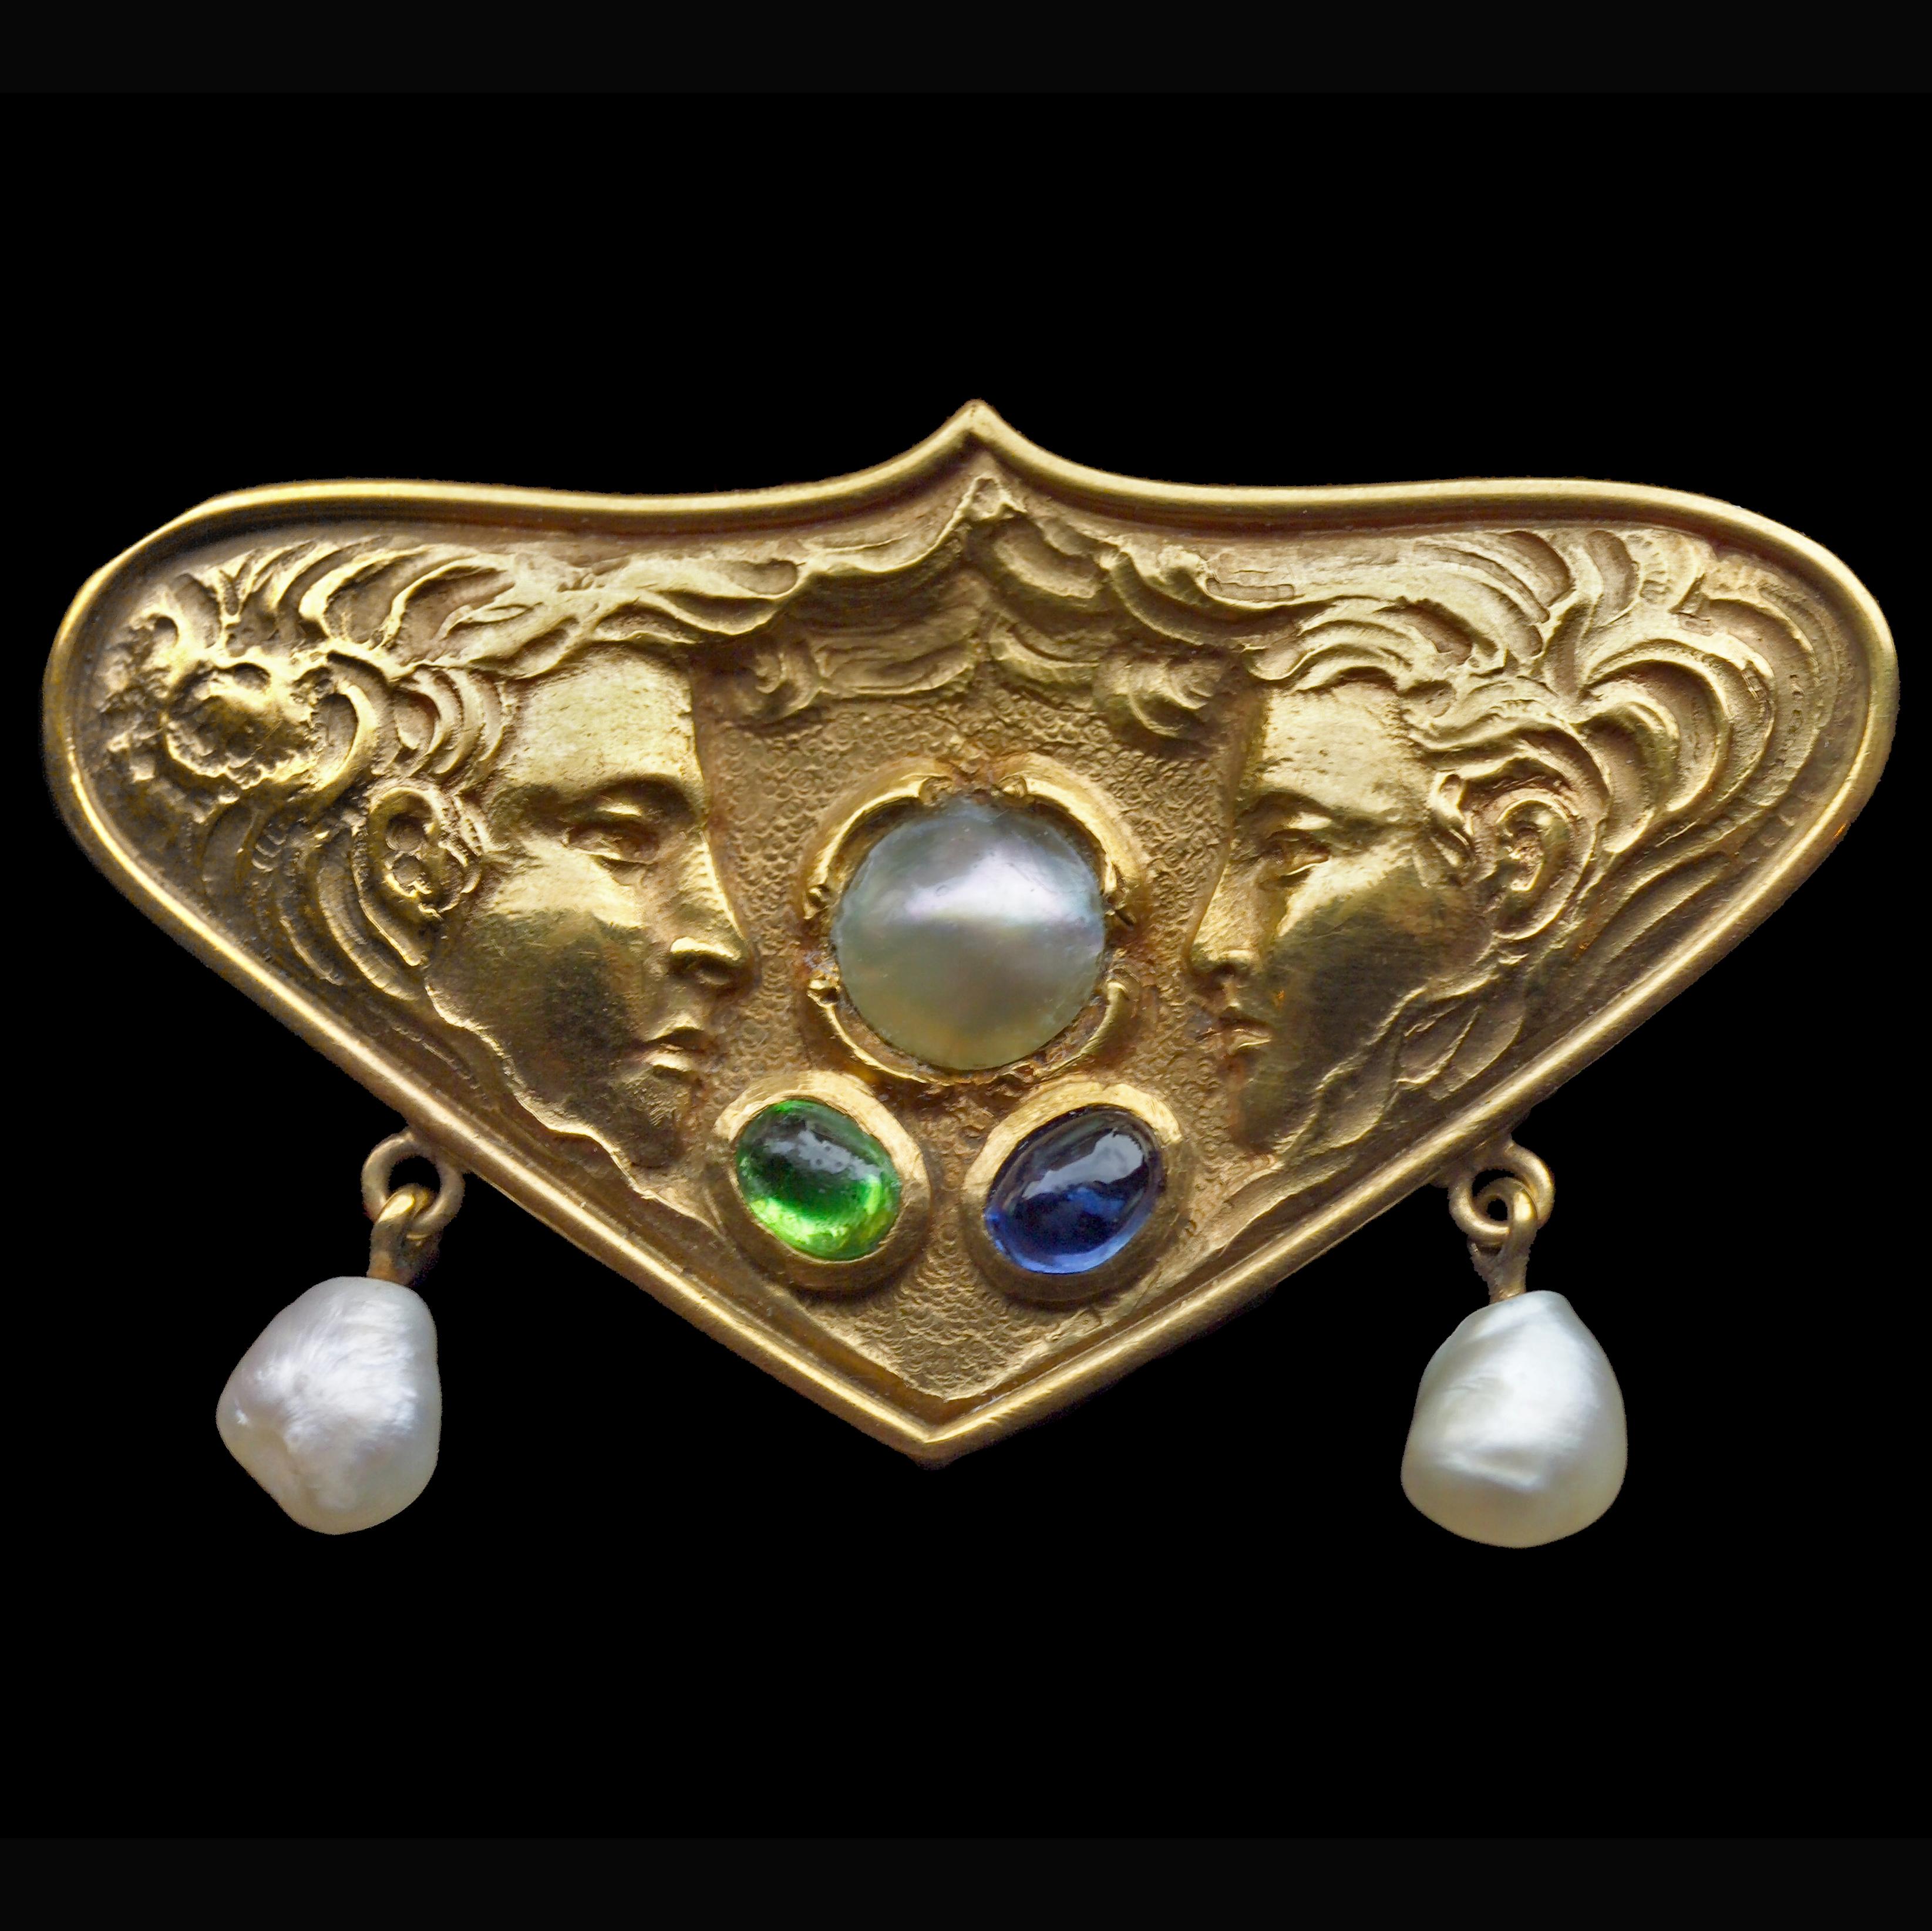 Jugendstil Brooch Attributed to Fritz Wolber, circa 1900
llustrated in our book:
Beatriz Chadour-Sampson & Sonya Newell-Smith, Tadema Gallery London Jewellery from the 1860s to 1960s, Arnoldsche Art Publishers, Stuttgart 2021, cat. no. 243
cf. Fritz